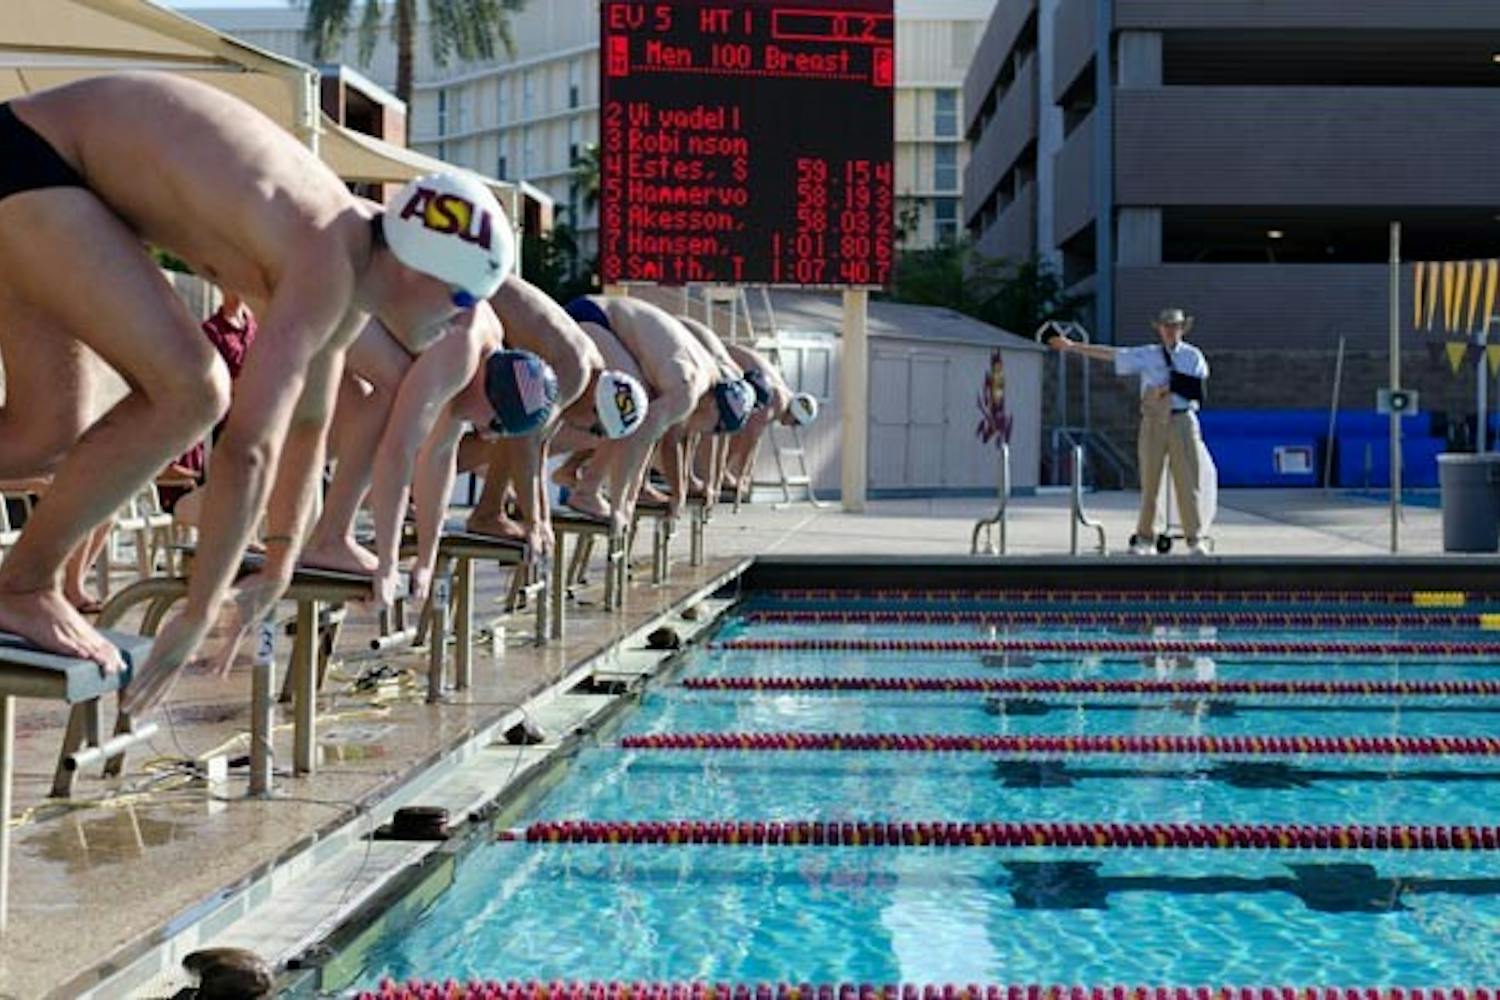 TAKE YOUR MARK: Air Force and ASU men's swimmers line up on the starting blocks during Friday's meet at Mona Plummer Aquatic Center. Air Force dominated the meet, taking 13 of 14 events from the young Sun Devils team. (Photo by Aaron Lavinsky)